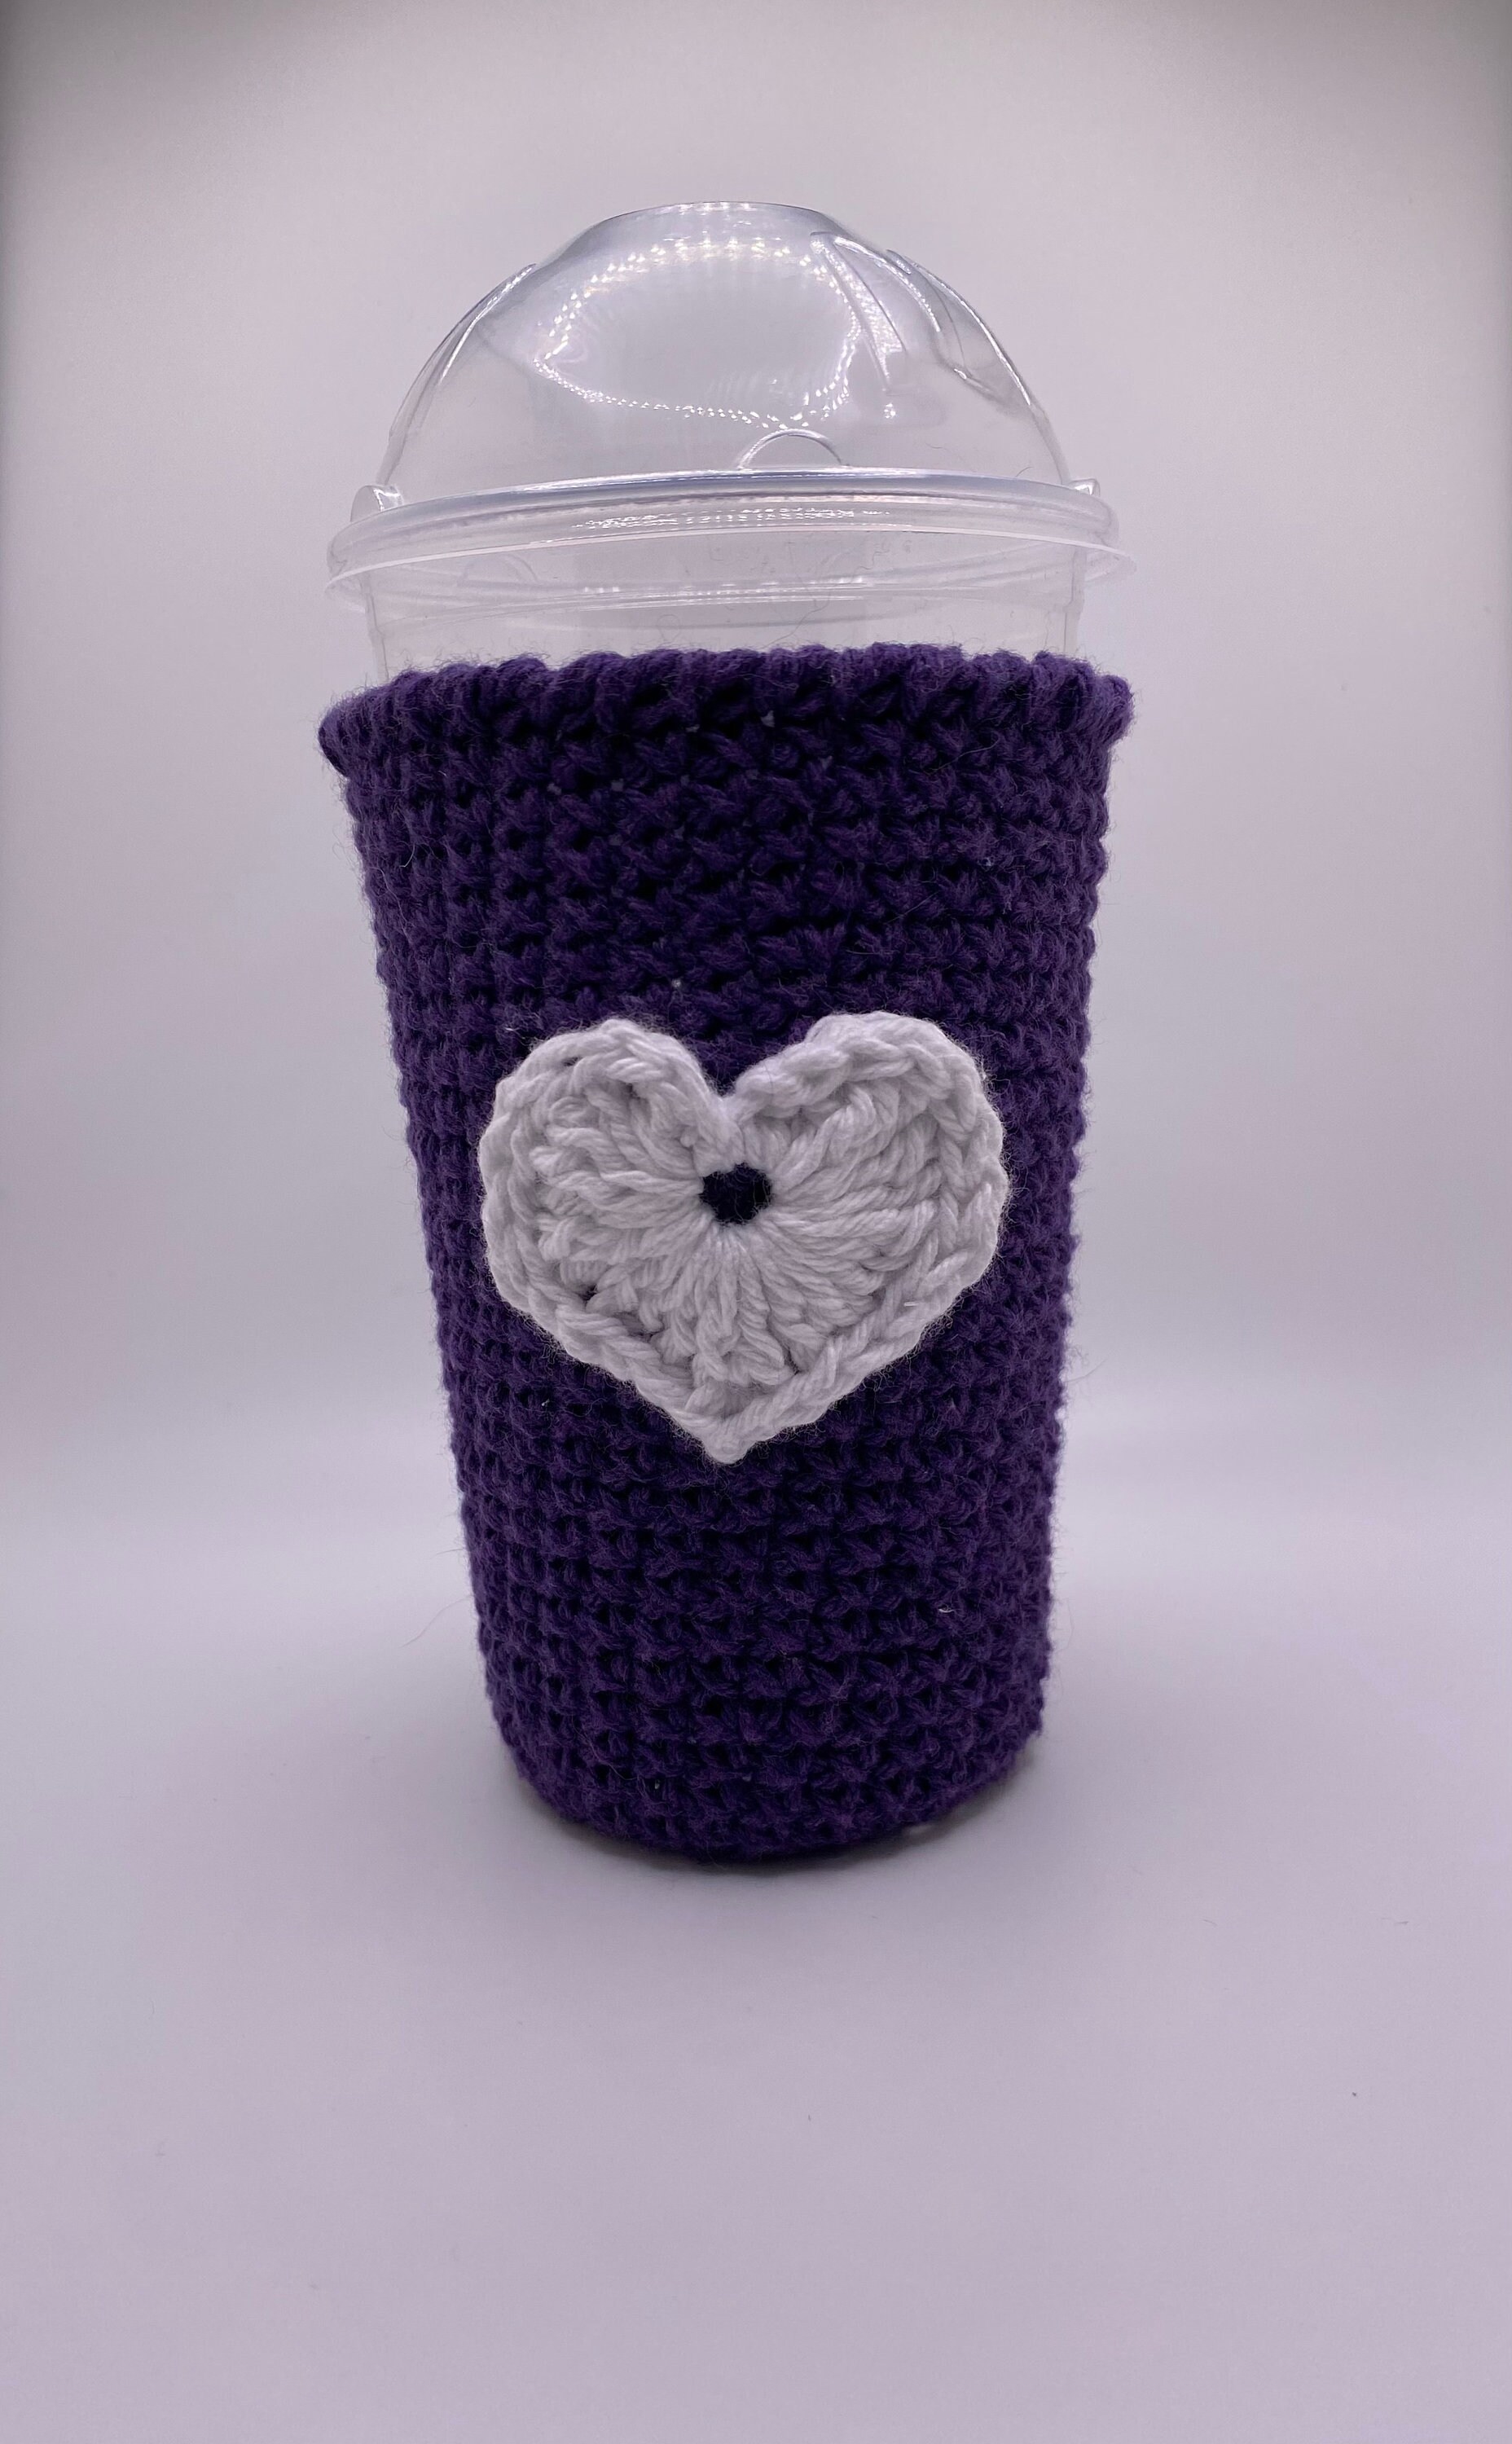 CRICUT Cup Cozy and Cup Sleeve Templates, for Handmade Cup Cozies